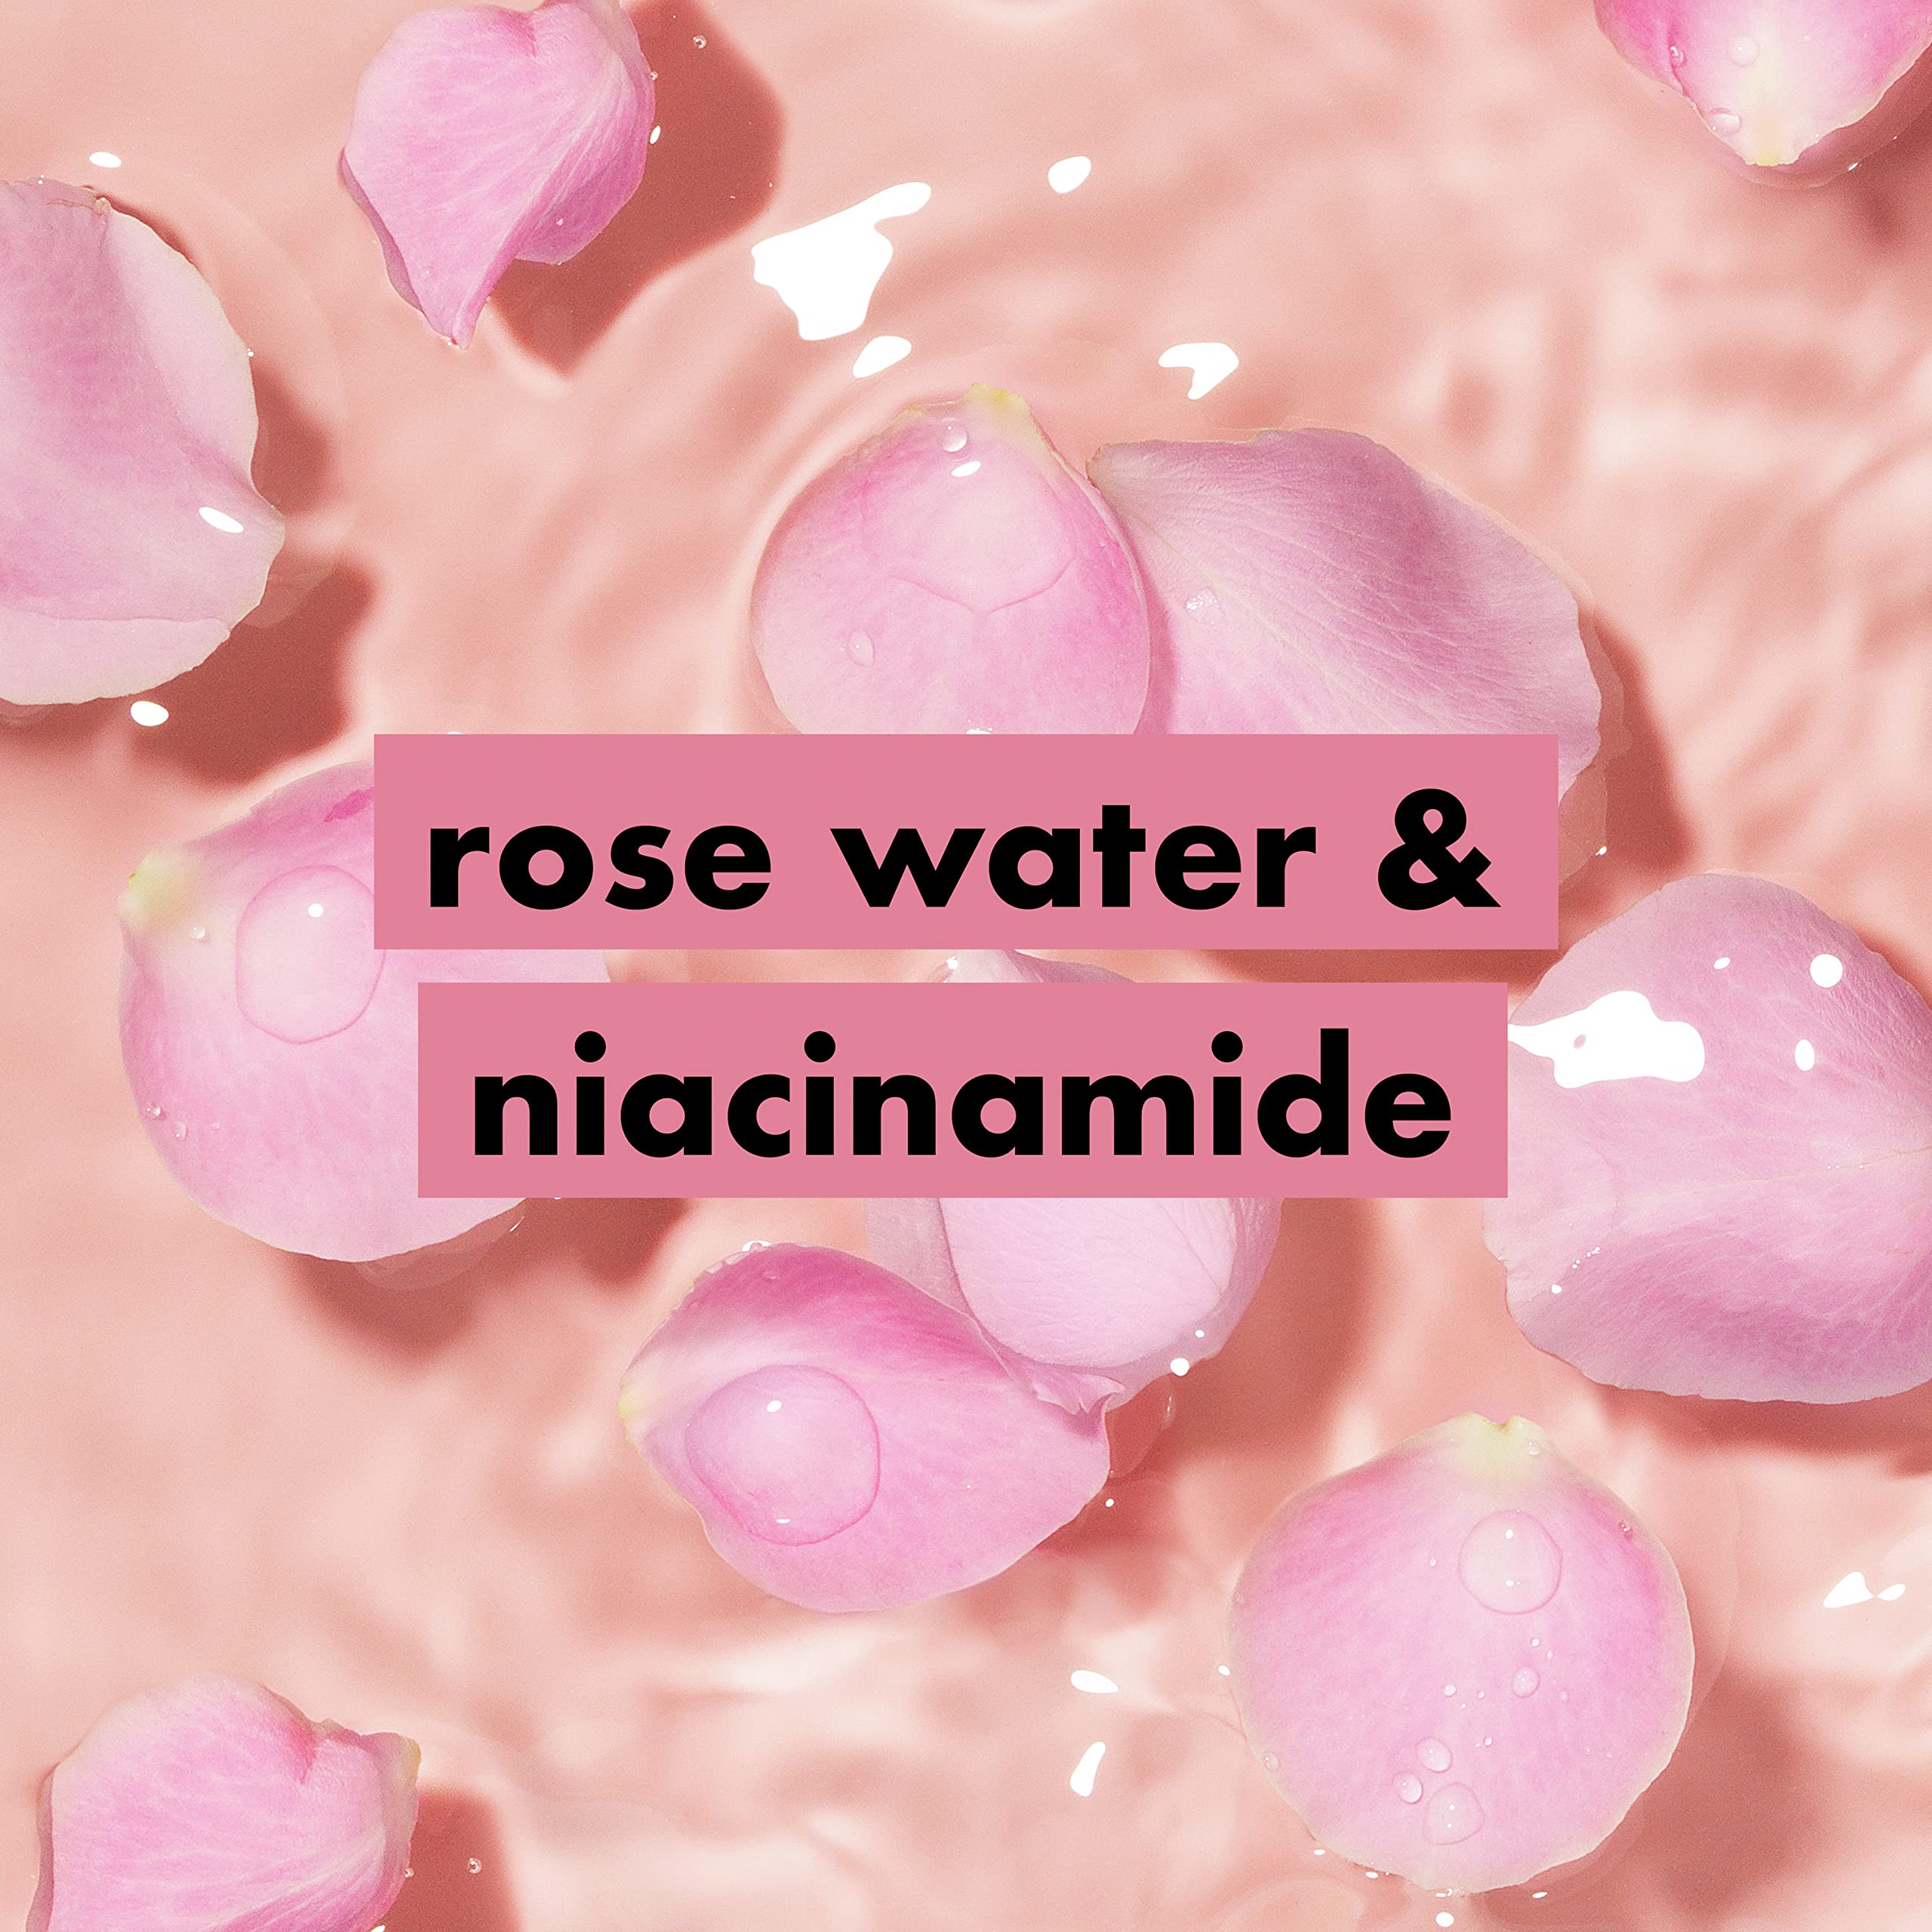 Love Beauty And Planet Plant-Based Body Wash Nourish and Illuminate Skin Rose Water and Niacinamide Made with Plant-Based Cleansers and Skin Care Ingredients 32.3 fl oz